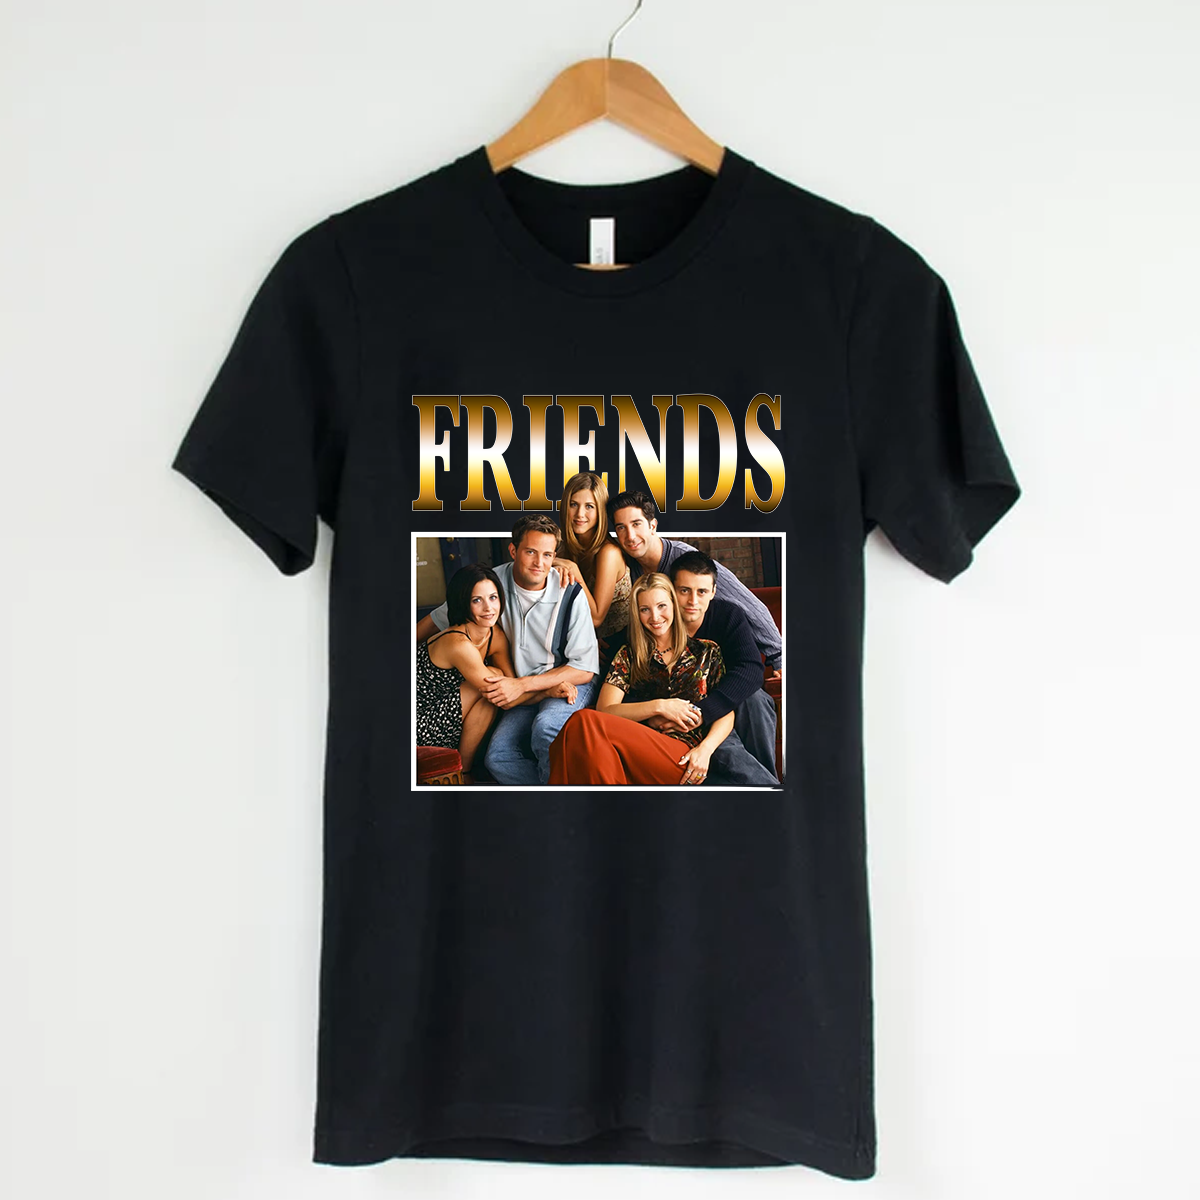 FRIENDS Retro Poster Style t-shirt